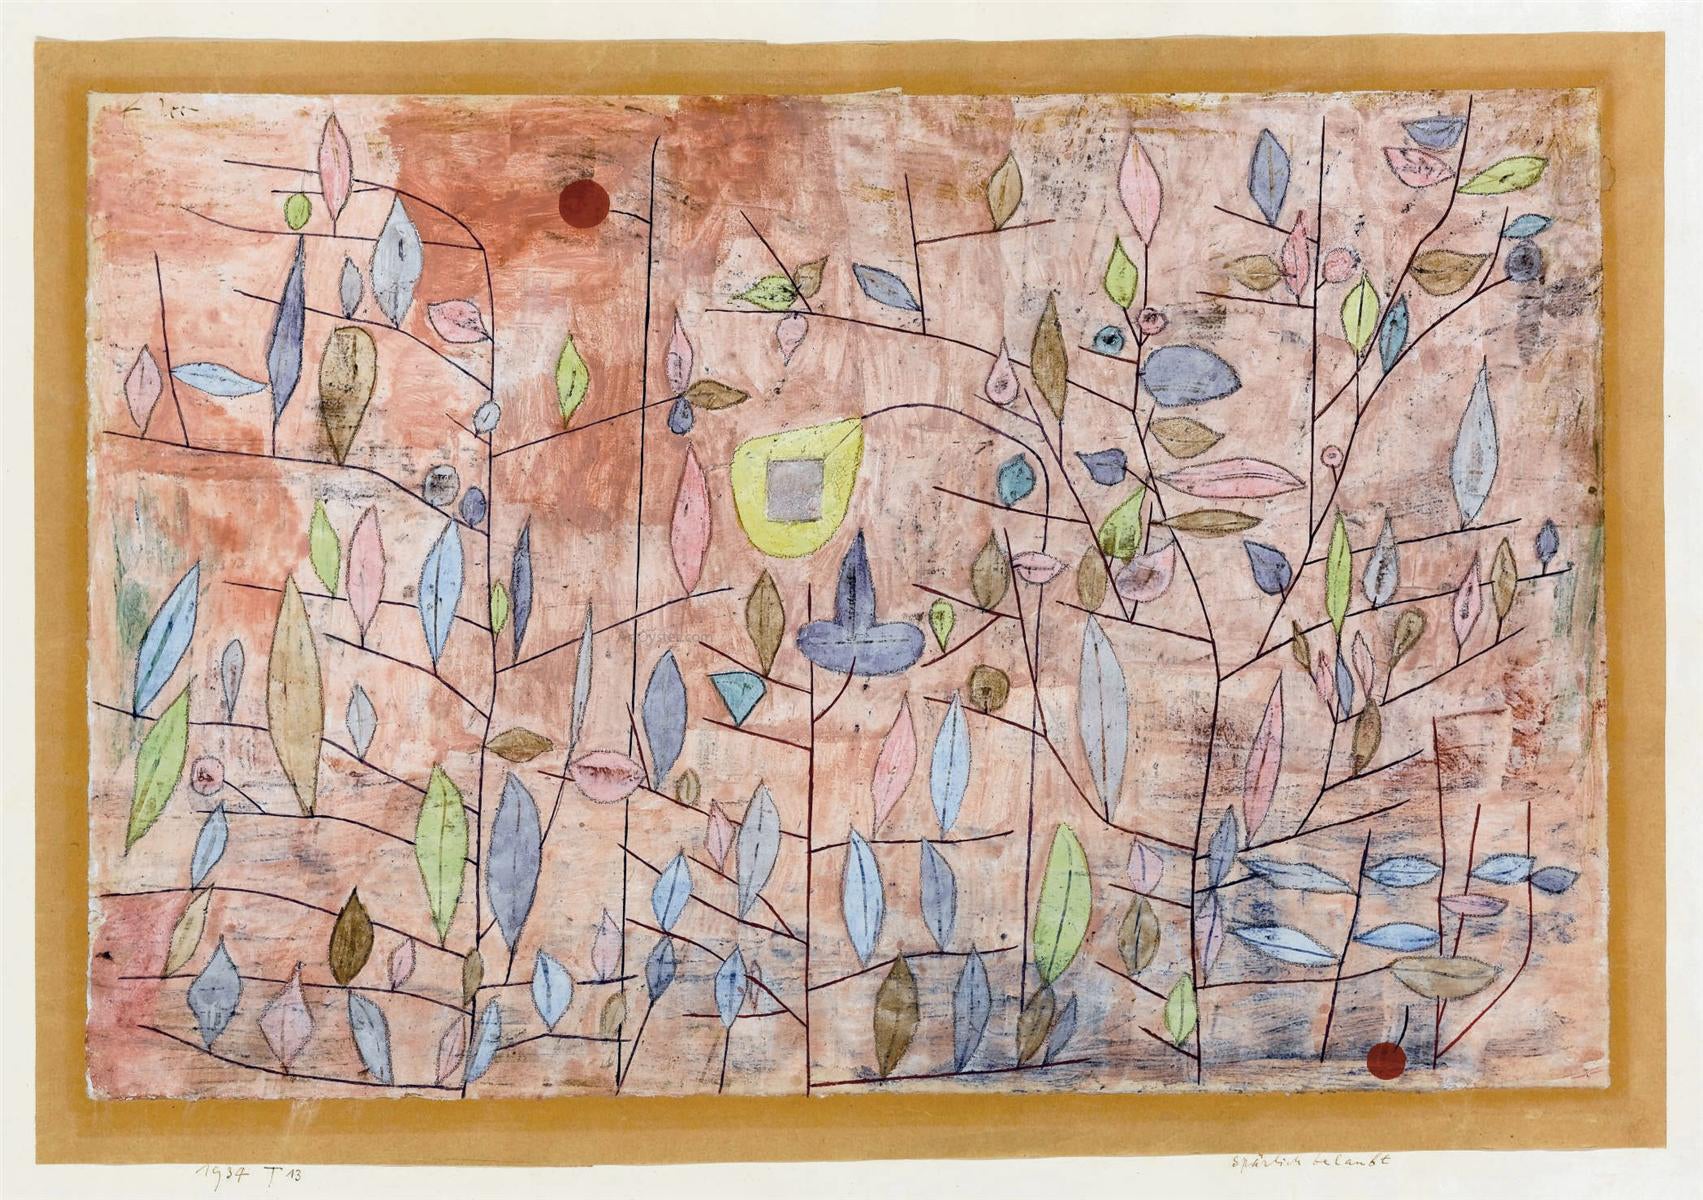  Paul Klee Sparse Foliage - Hand Painted Oil Painting